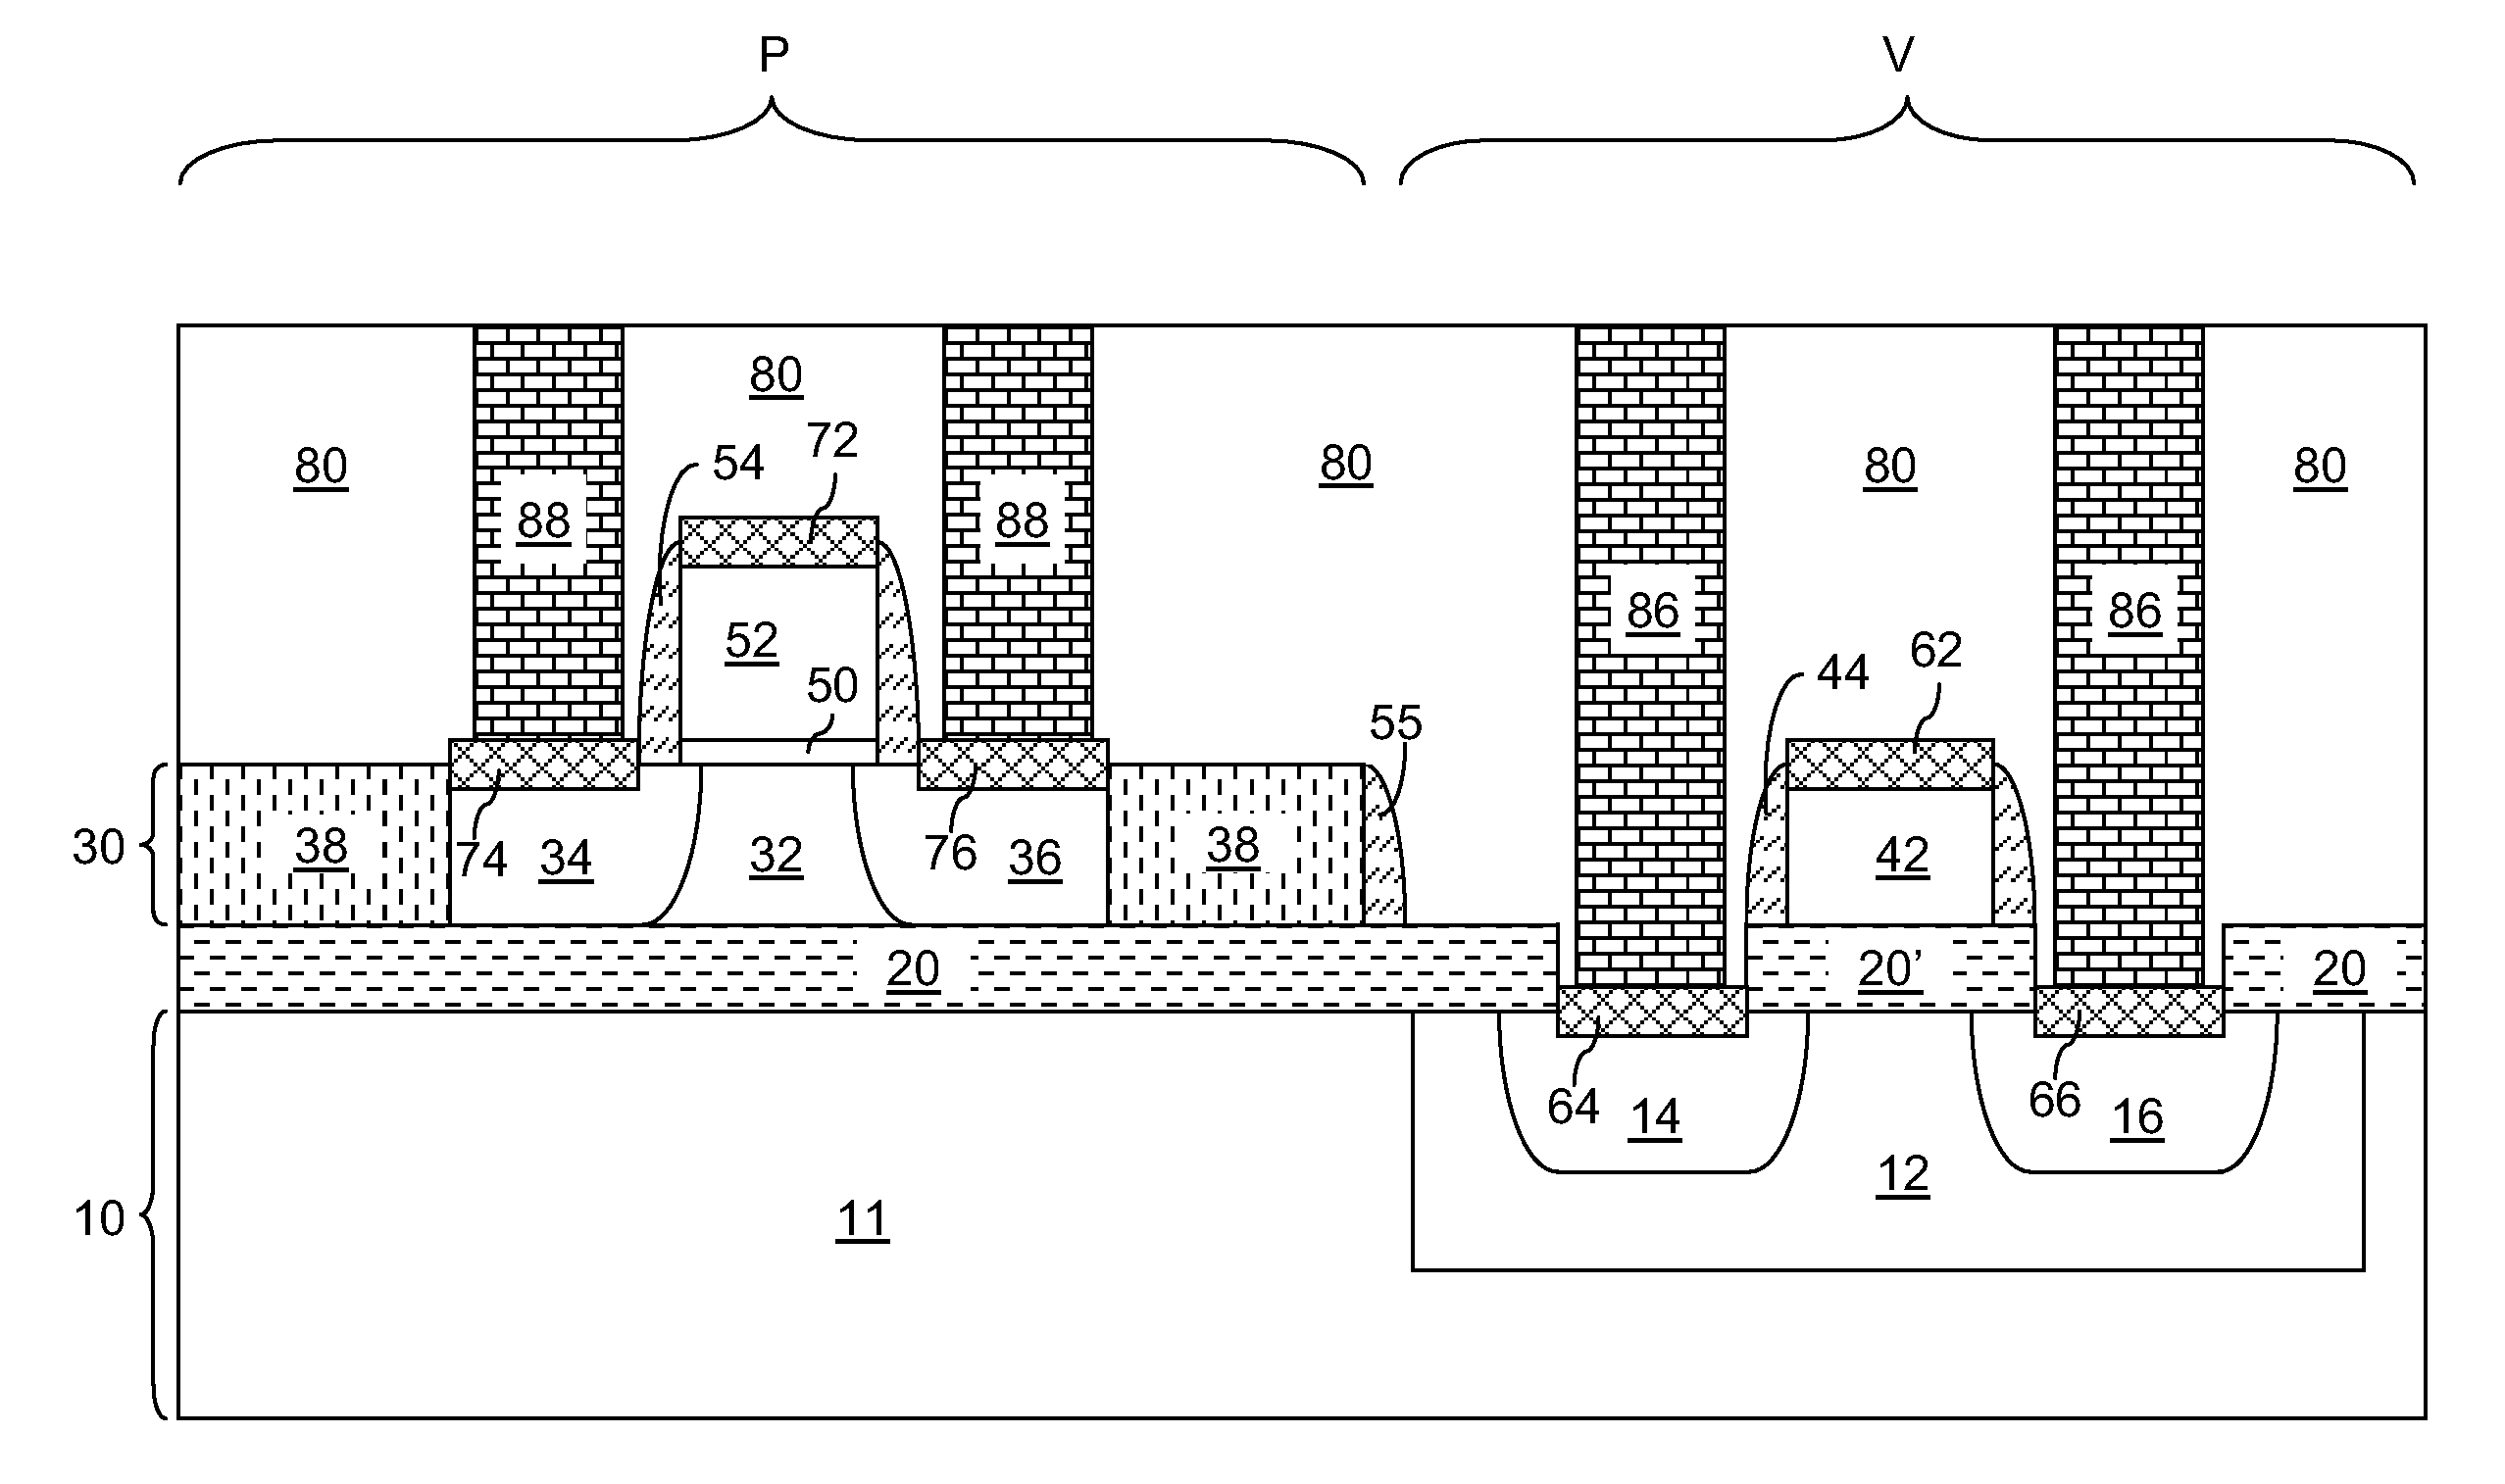 Semiconductor structure including a high performance fet and a high voltage fet on a soi substrate